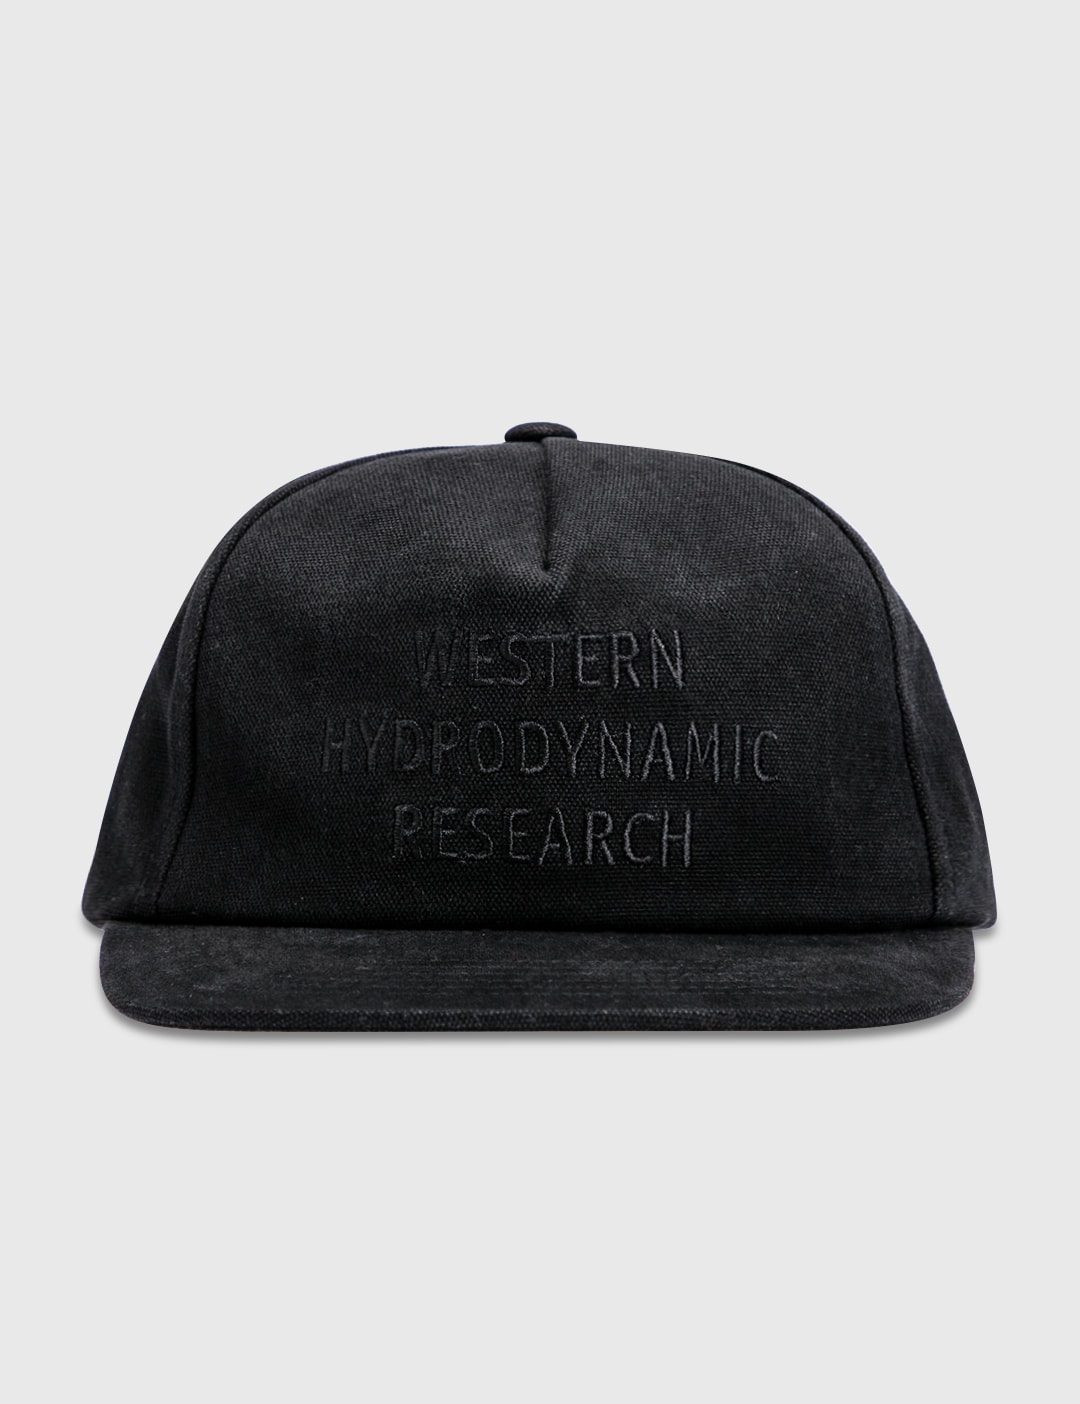 Western Hydrodynamic Research Tonal Stitching Black Cap Placeholder Image